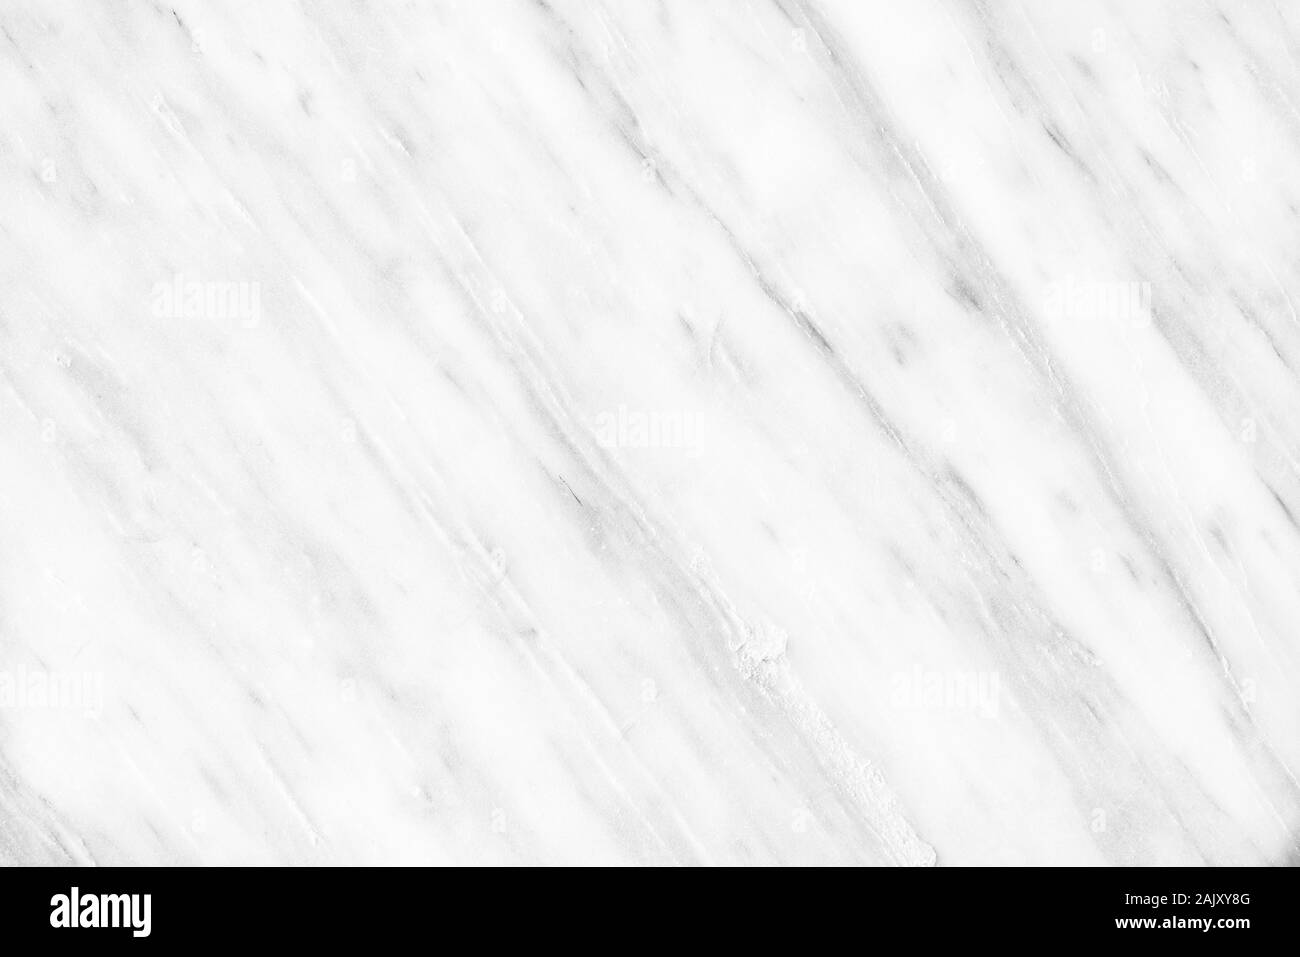 White Carrara Marble natural light for bathroom or kitchen white countertop. High resolution texture and pattern. Stock Photo